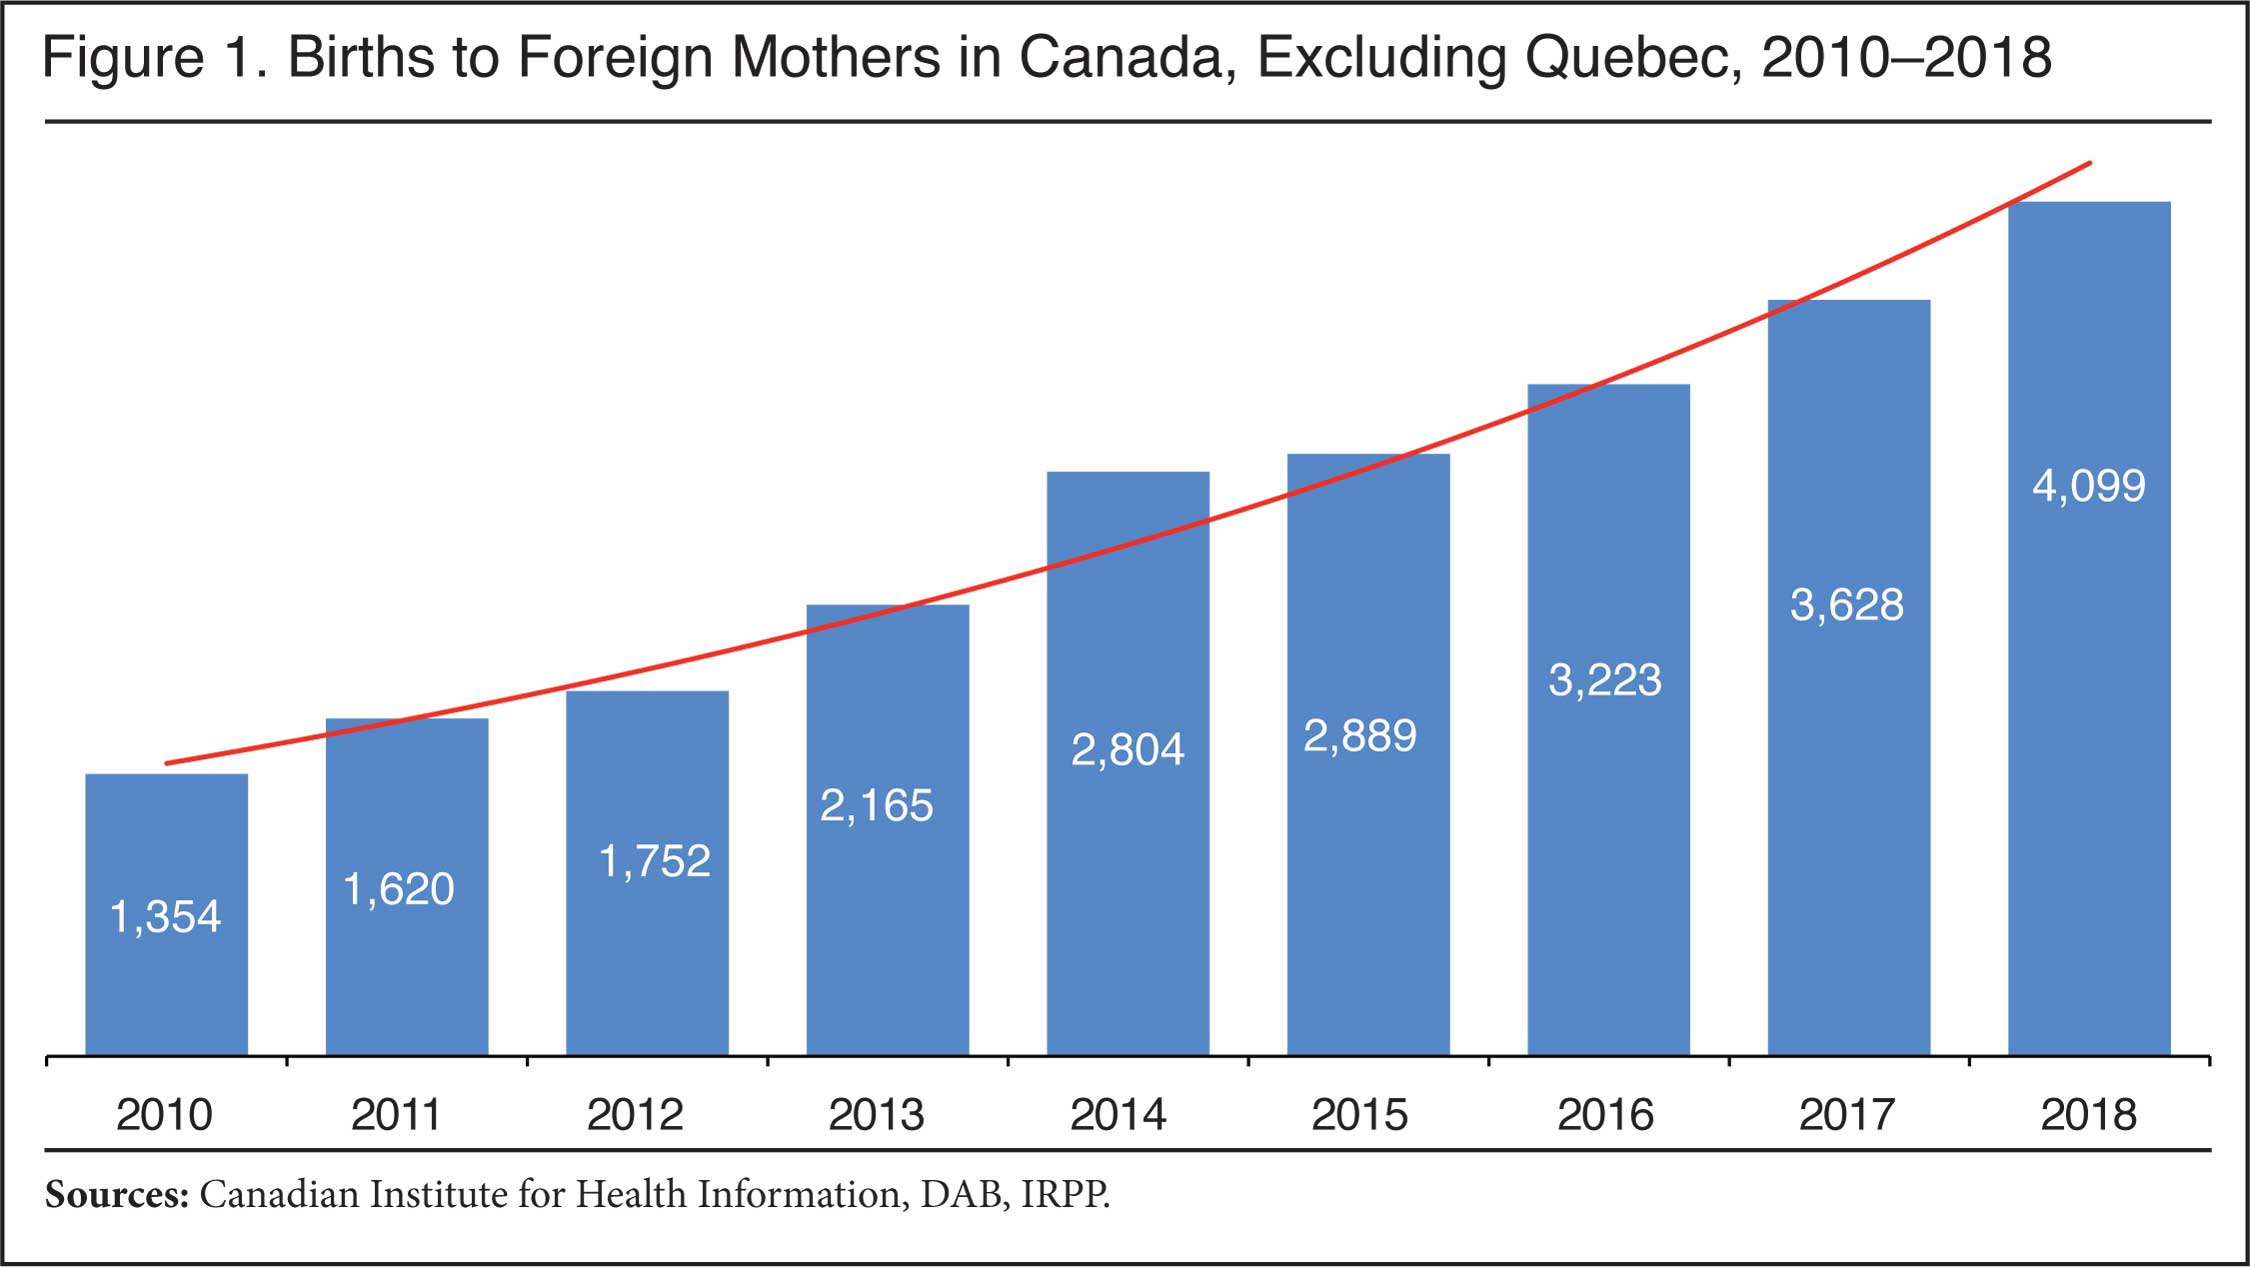 Graph: Births to Foreign Mothers in Canada, Excluding Quebec, 2010 - 2018